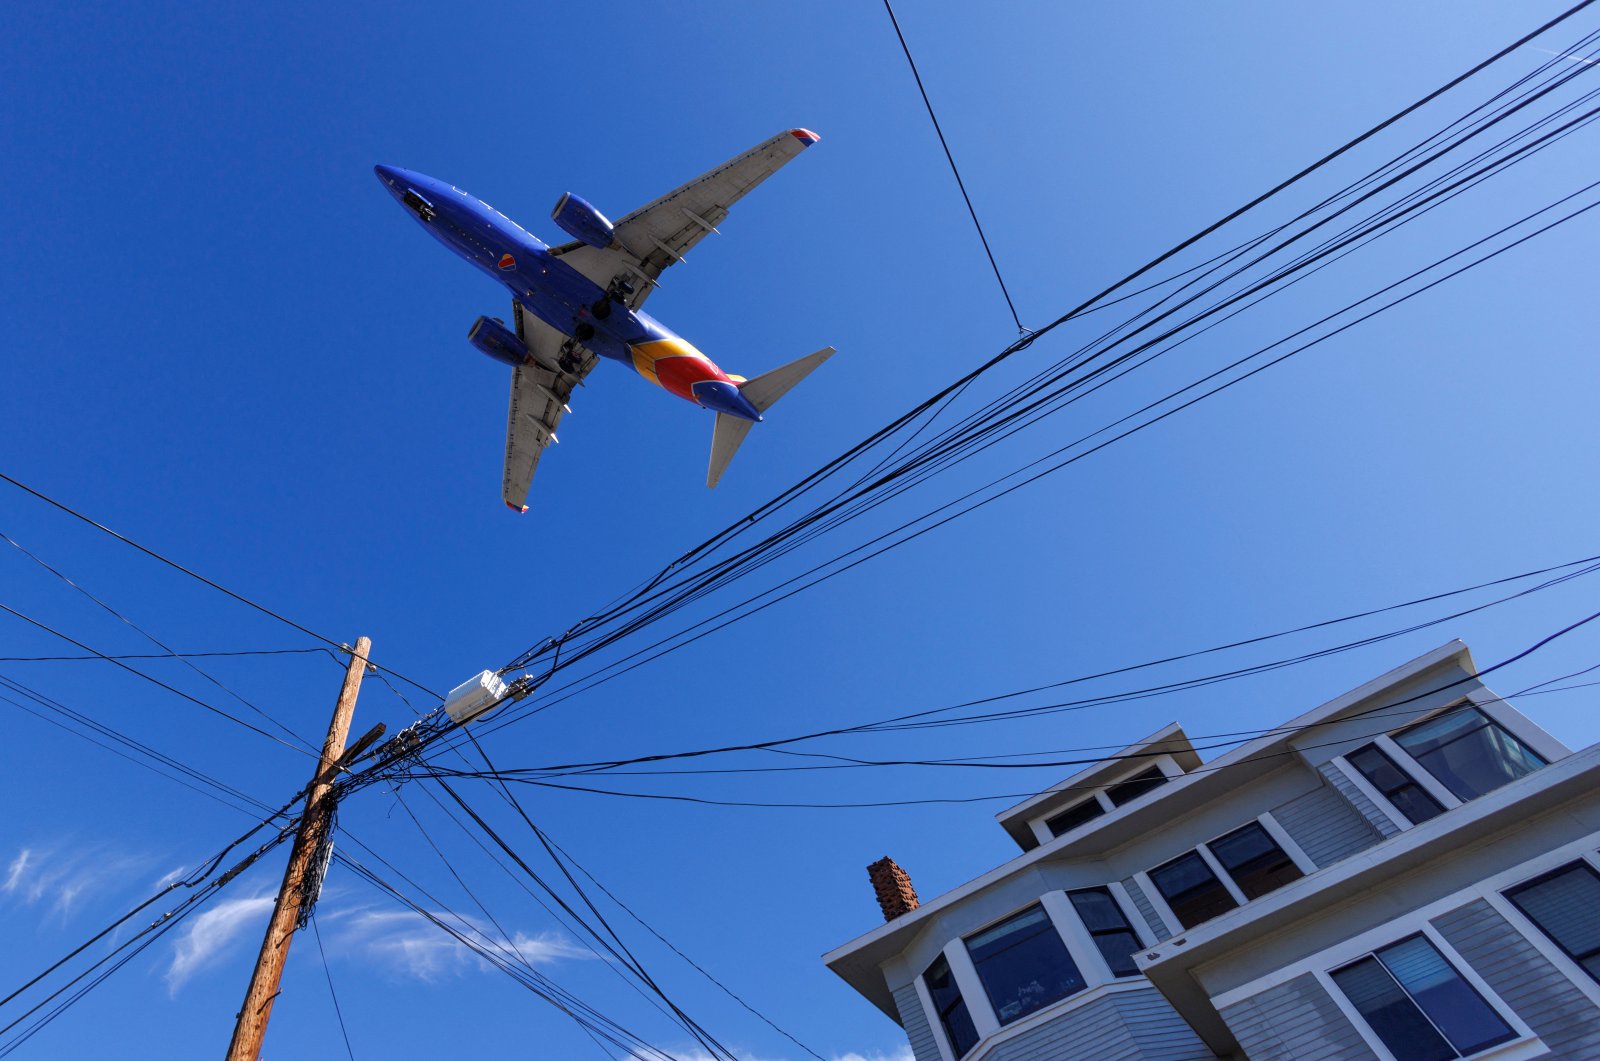 A Southwest Airlines plane approaches to land at San Diego International Airport as U.S. telecom companies, airlines and the FAA continue to discuss the potential impact of 5G wireless services on aircraft electronics in San Diego, California, U.S., Jan. 6, 2022. (Reuters Photo)